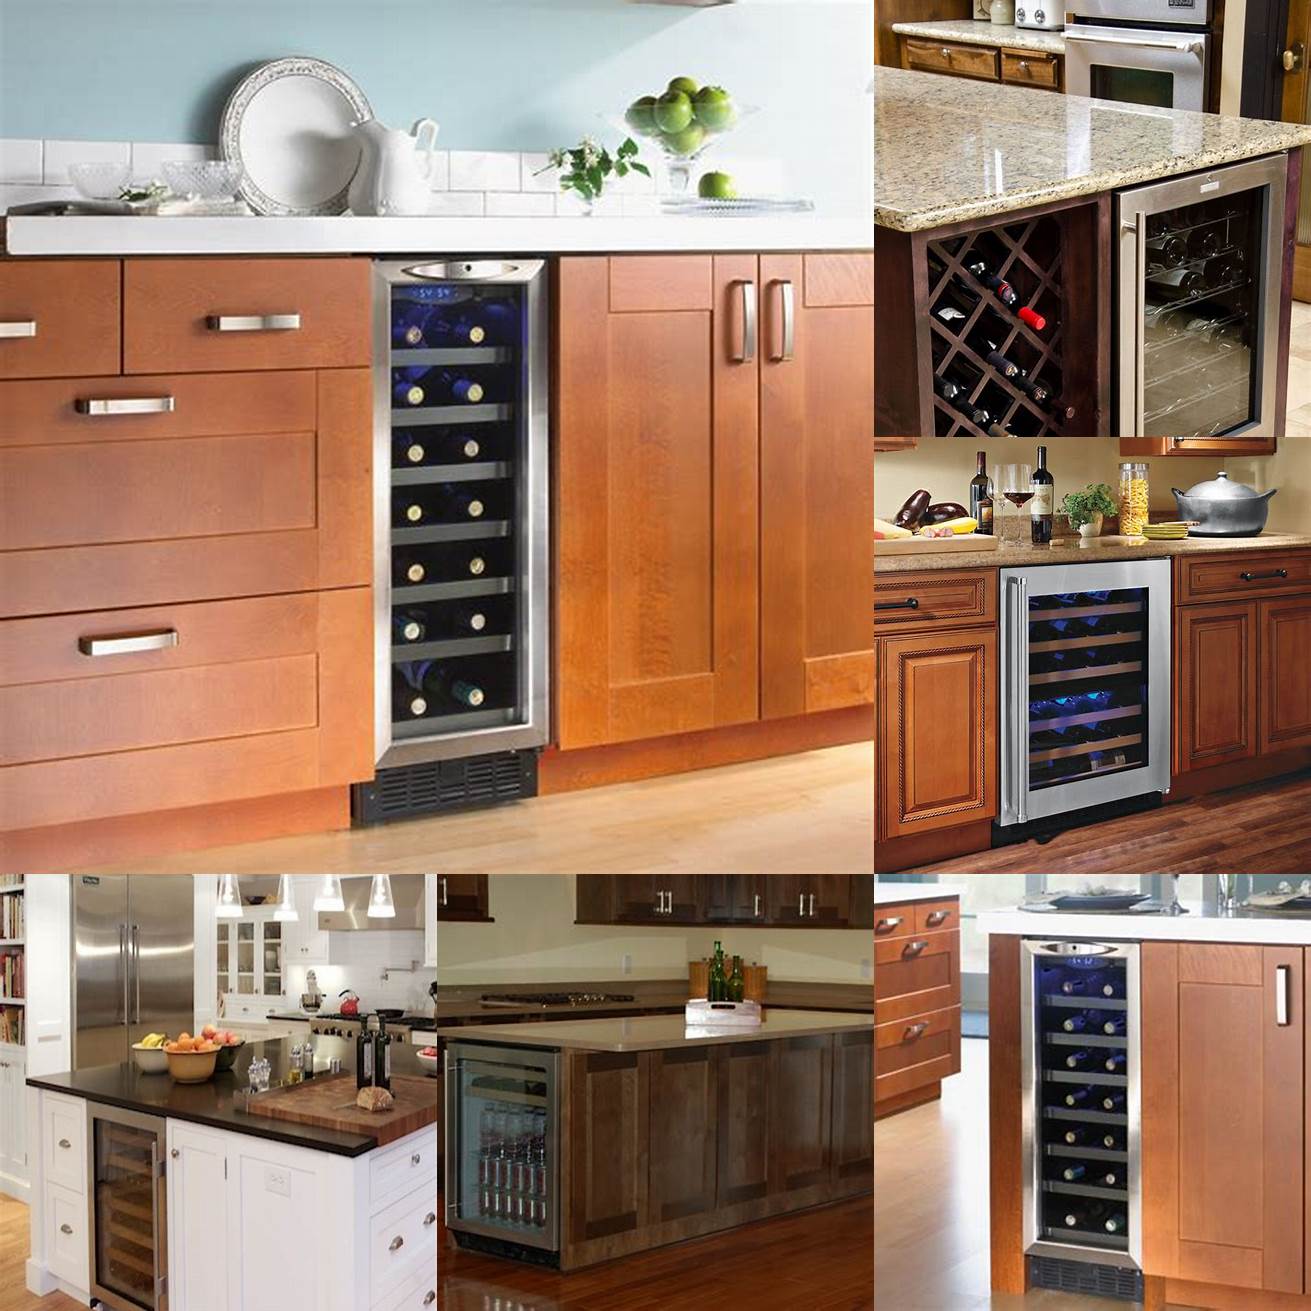 Wine cooler built into a kitchen island